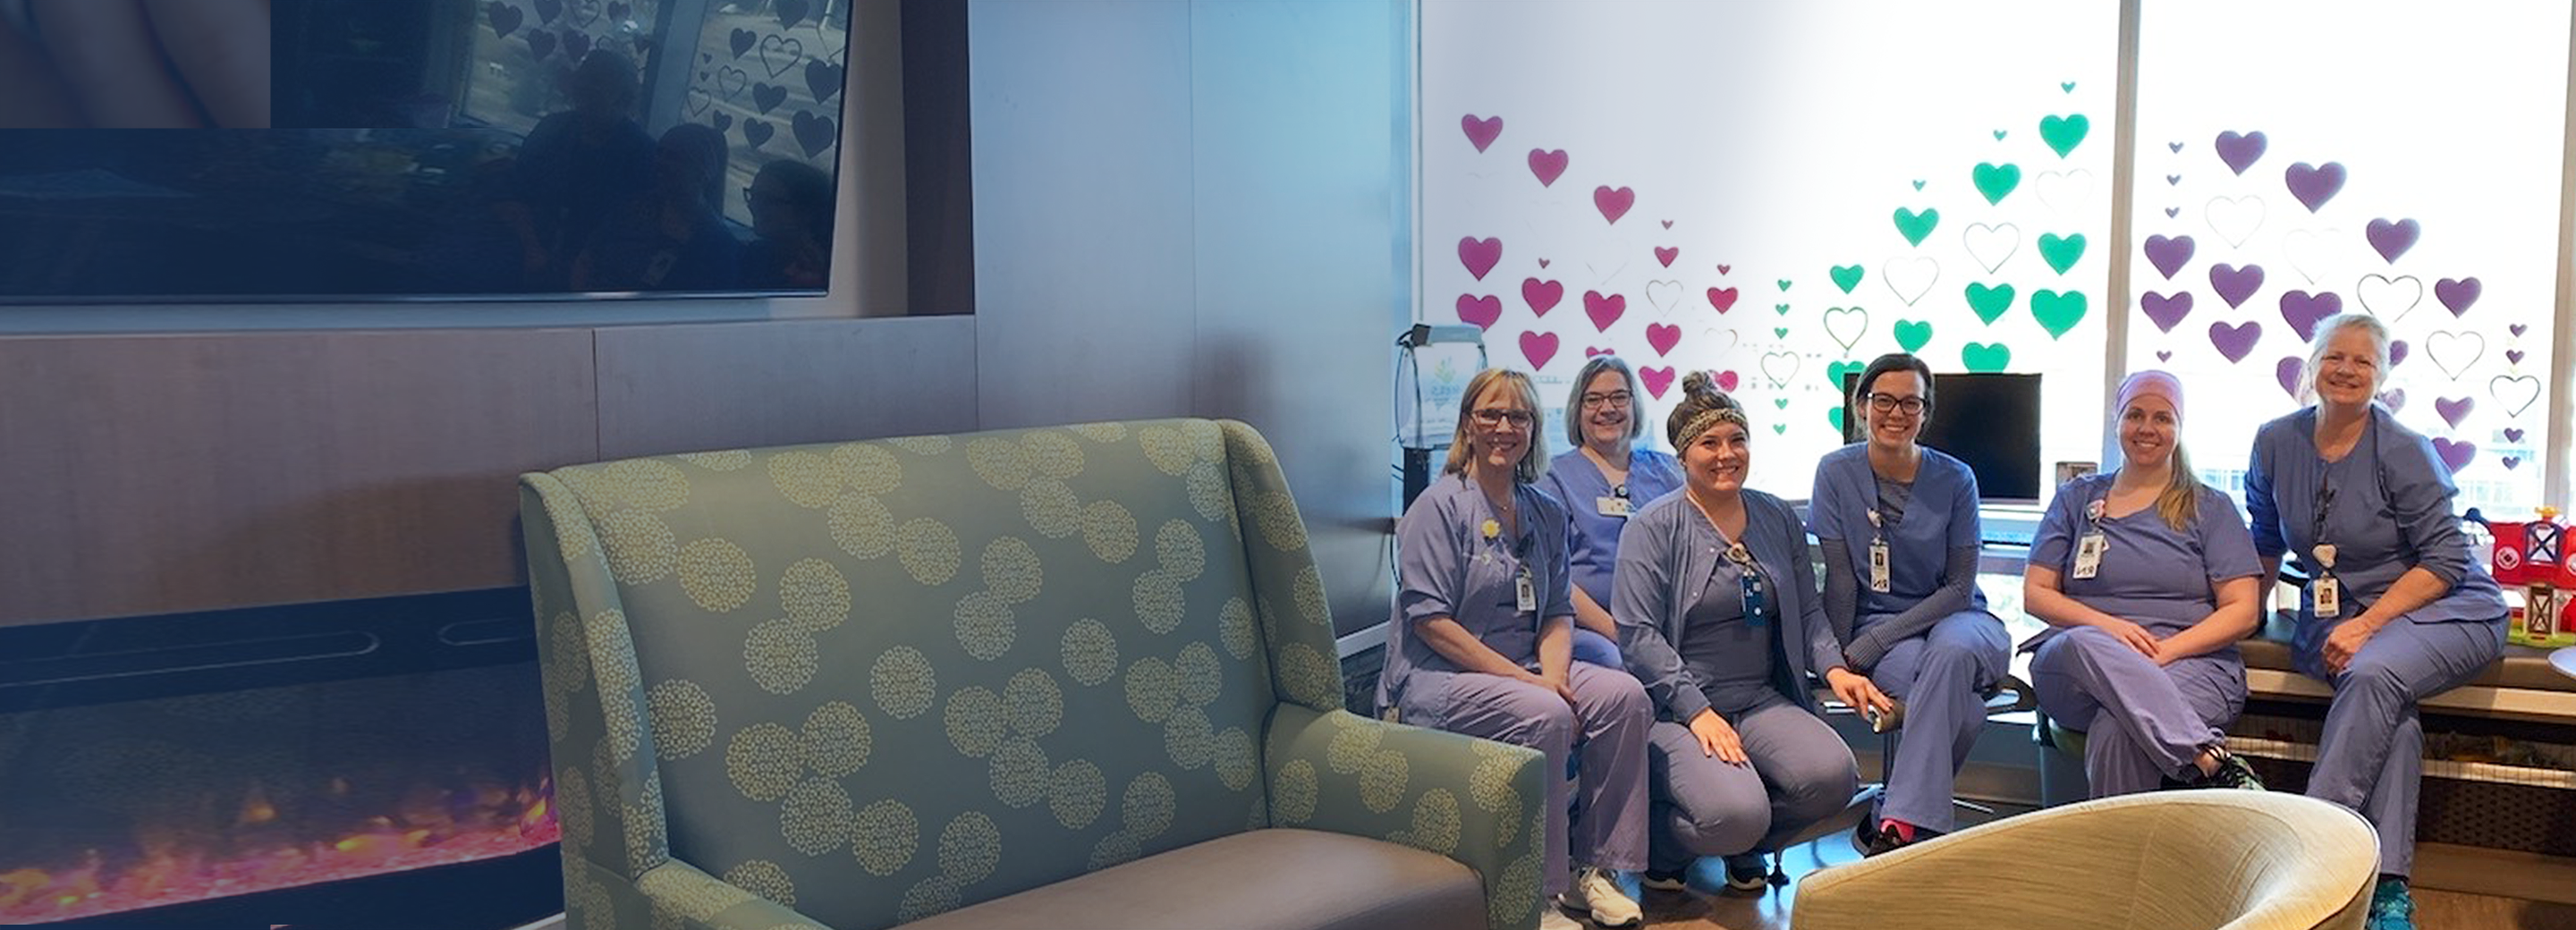 Pediatric nurses sit for the camera, lit by the window behind them decorated with multiple colors of heart symbols, furniture in soft focus in front